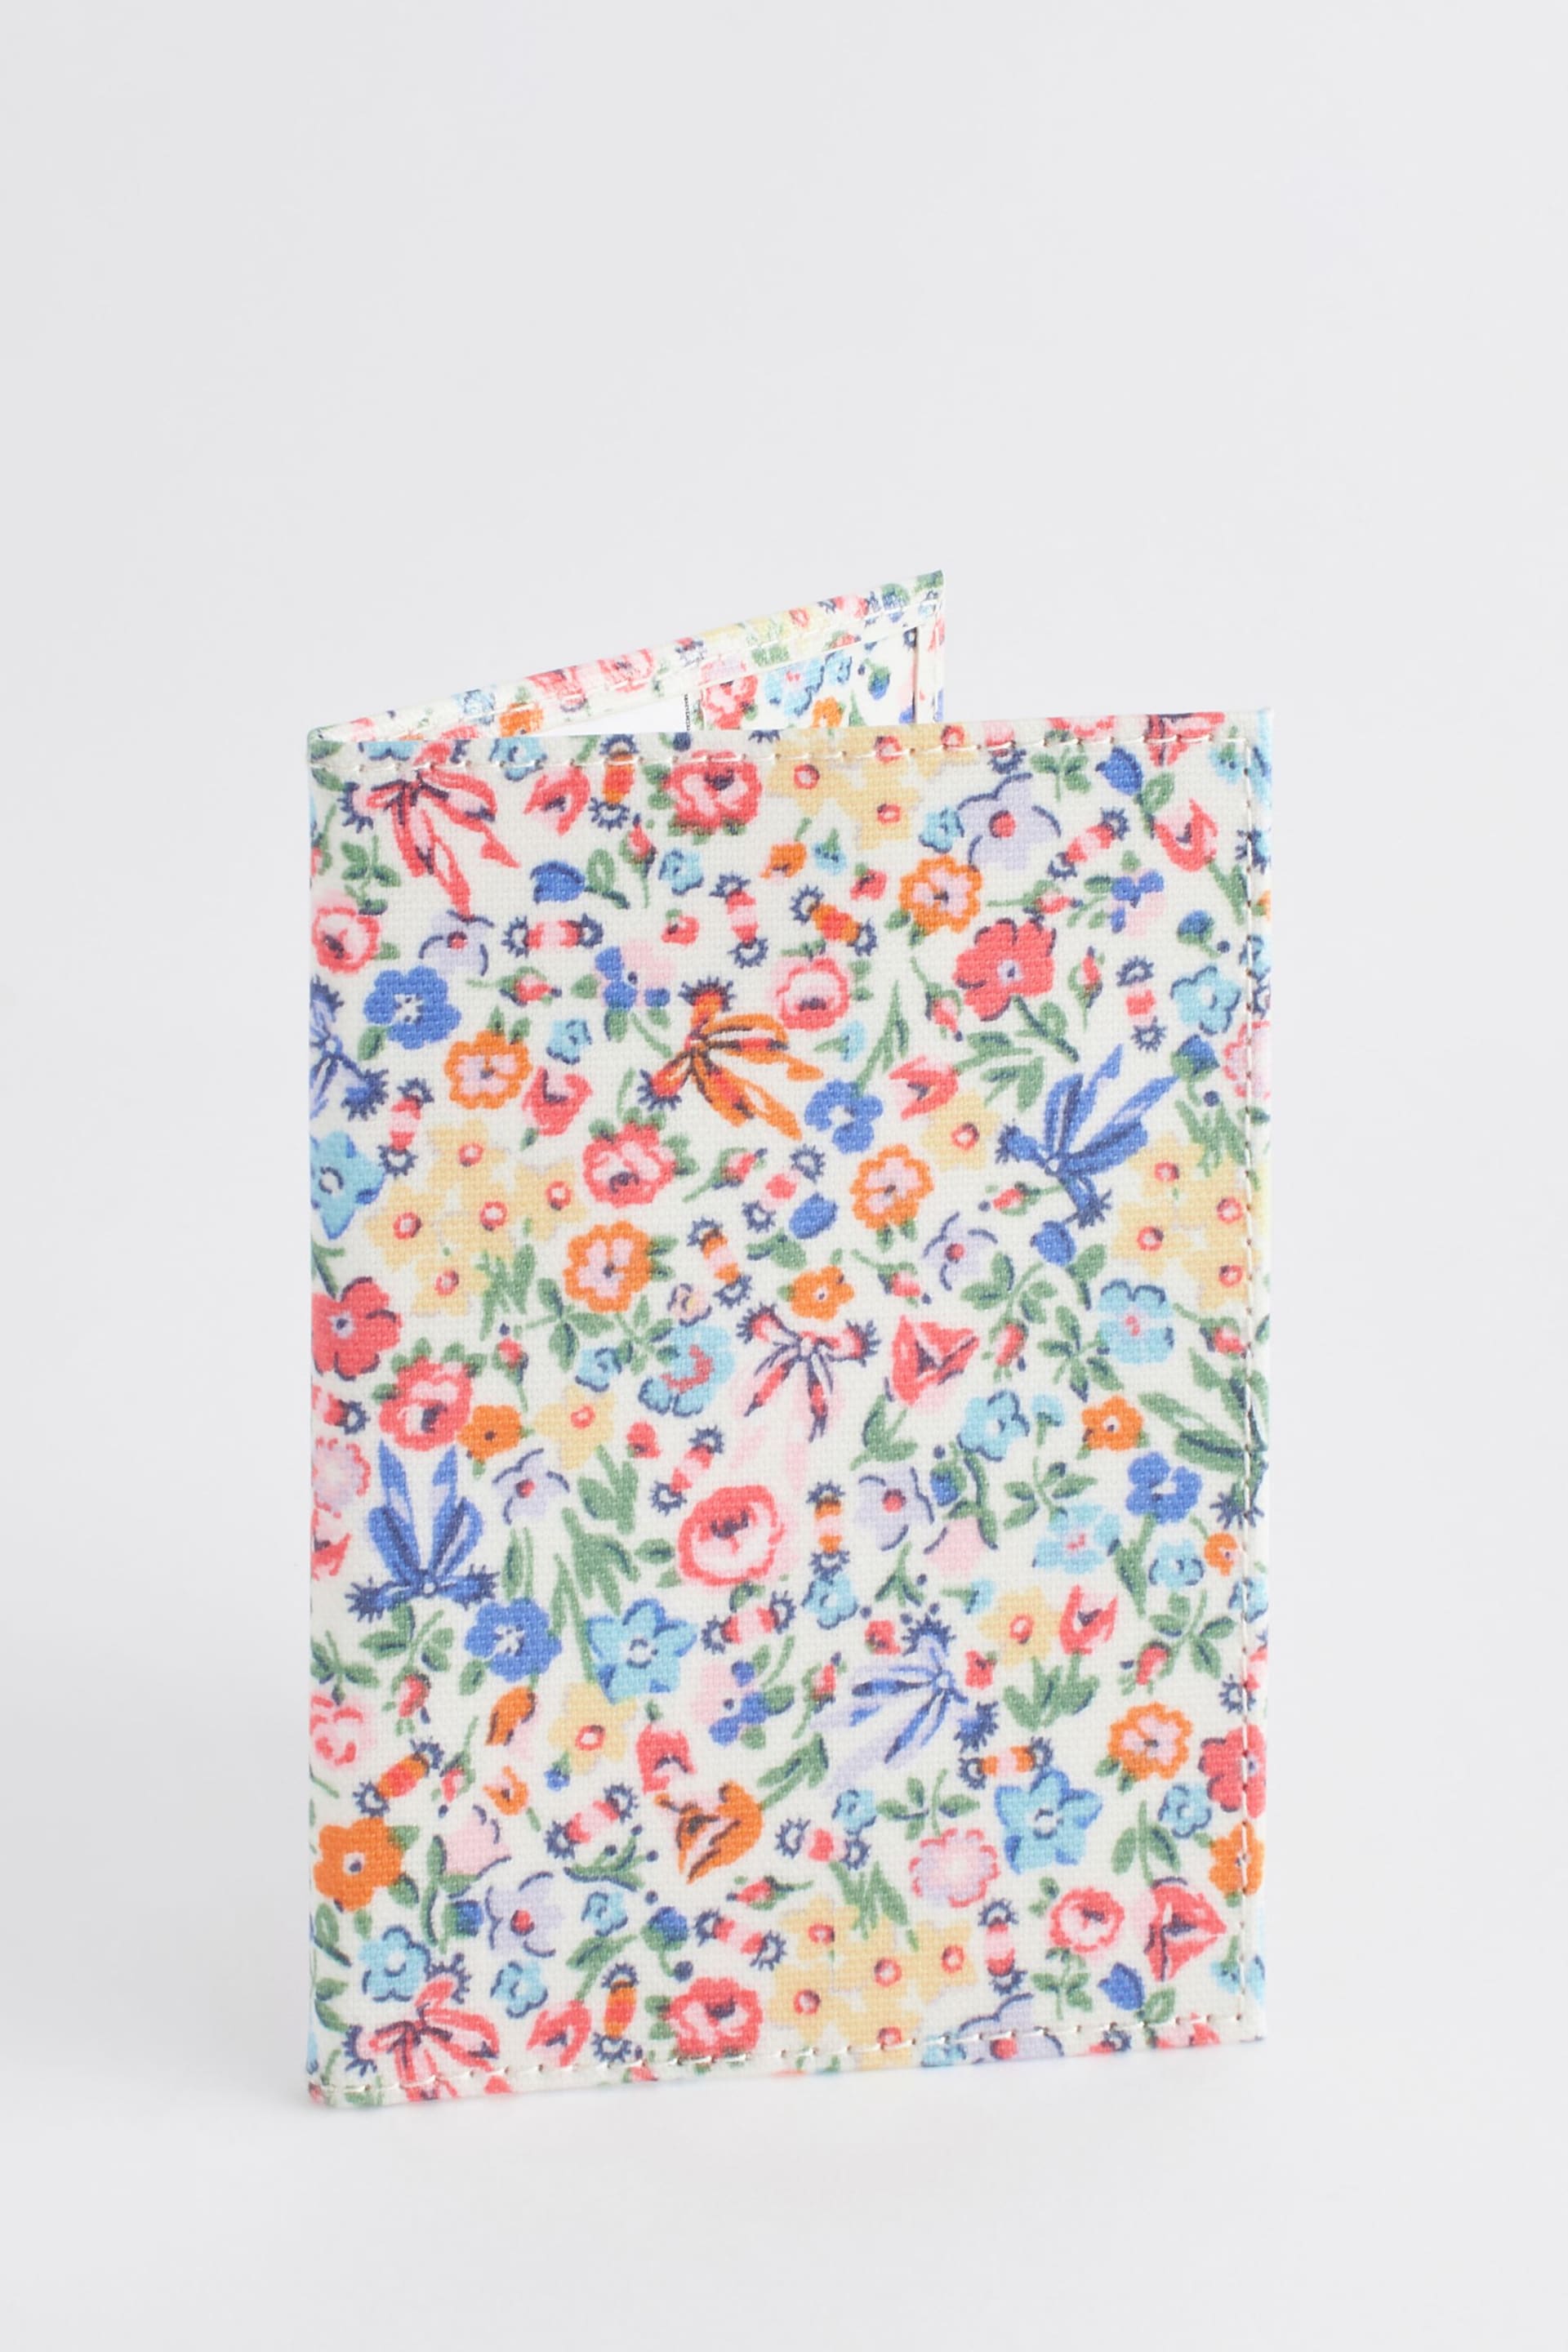 Cath Kidston Blue/Yellow Ditsy Floral Passport Cover - Image 1 of 4